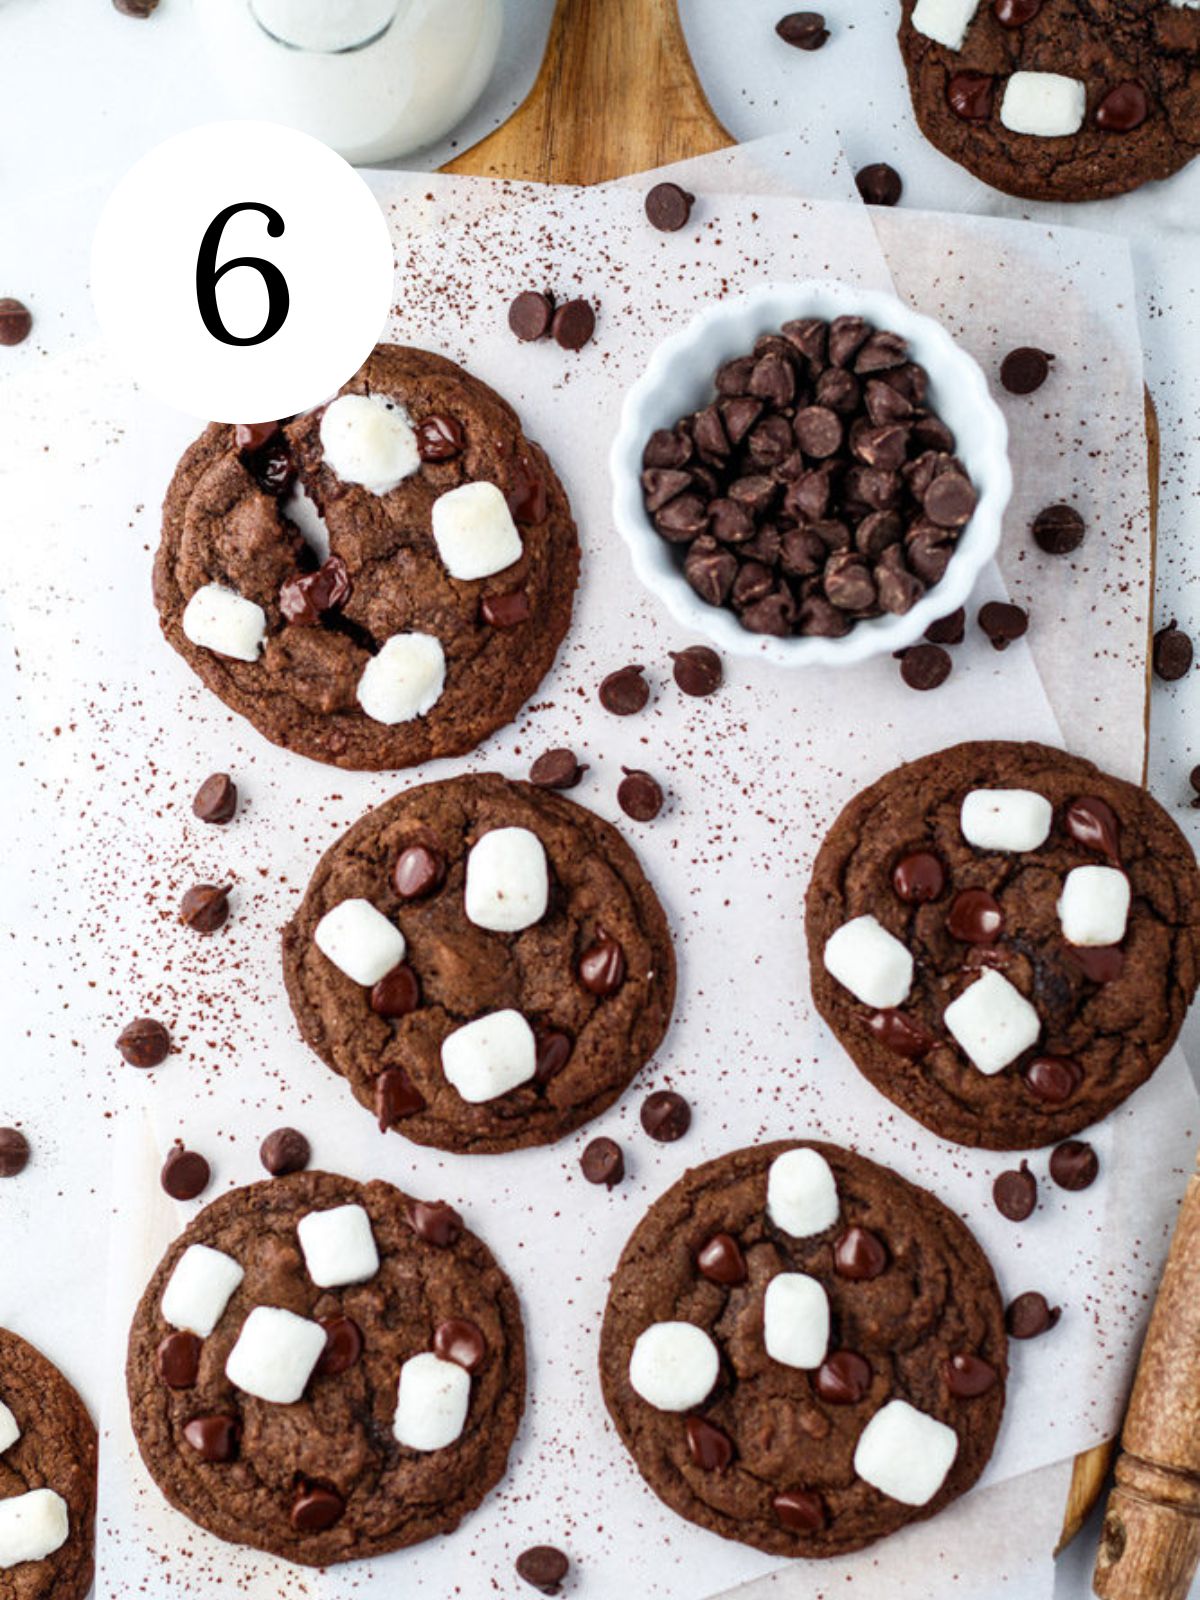 Marshmallow chocolate chip cookies on a tray with a bowl of chocolate chips.